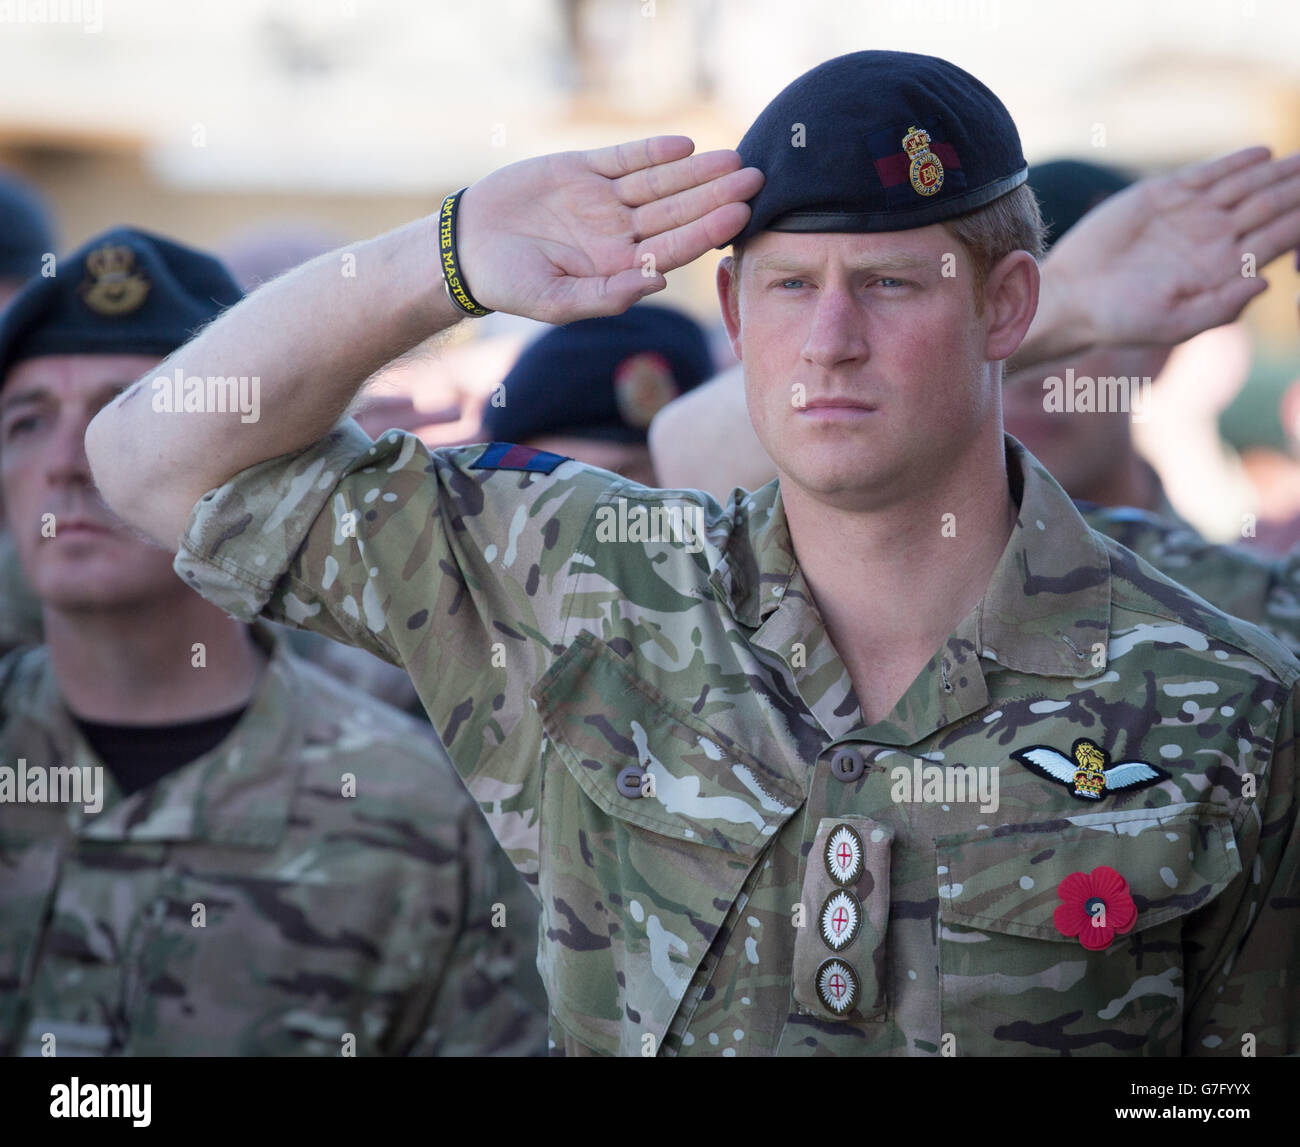 Prince Harry joins British troops and service personal remaining in Afghanistan and also International Security Assistance Force (ISAF) personnel and civilians as they gather for a Remembrance Sunday service at Kandahar Airfield in Kandahar, Afghanistan. Stock Photo